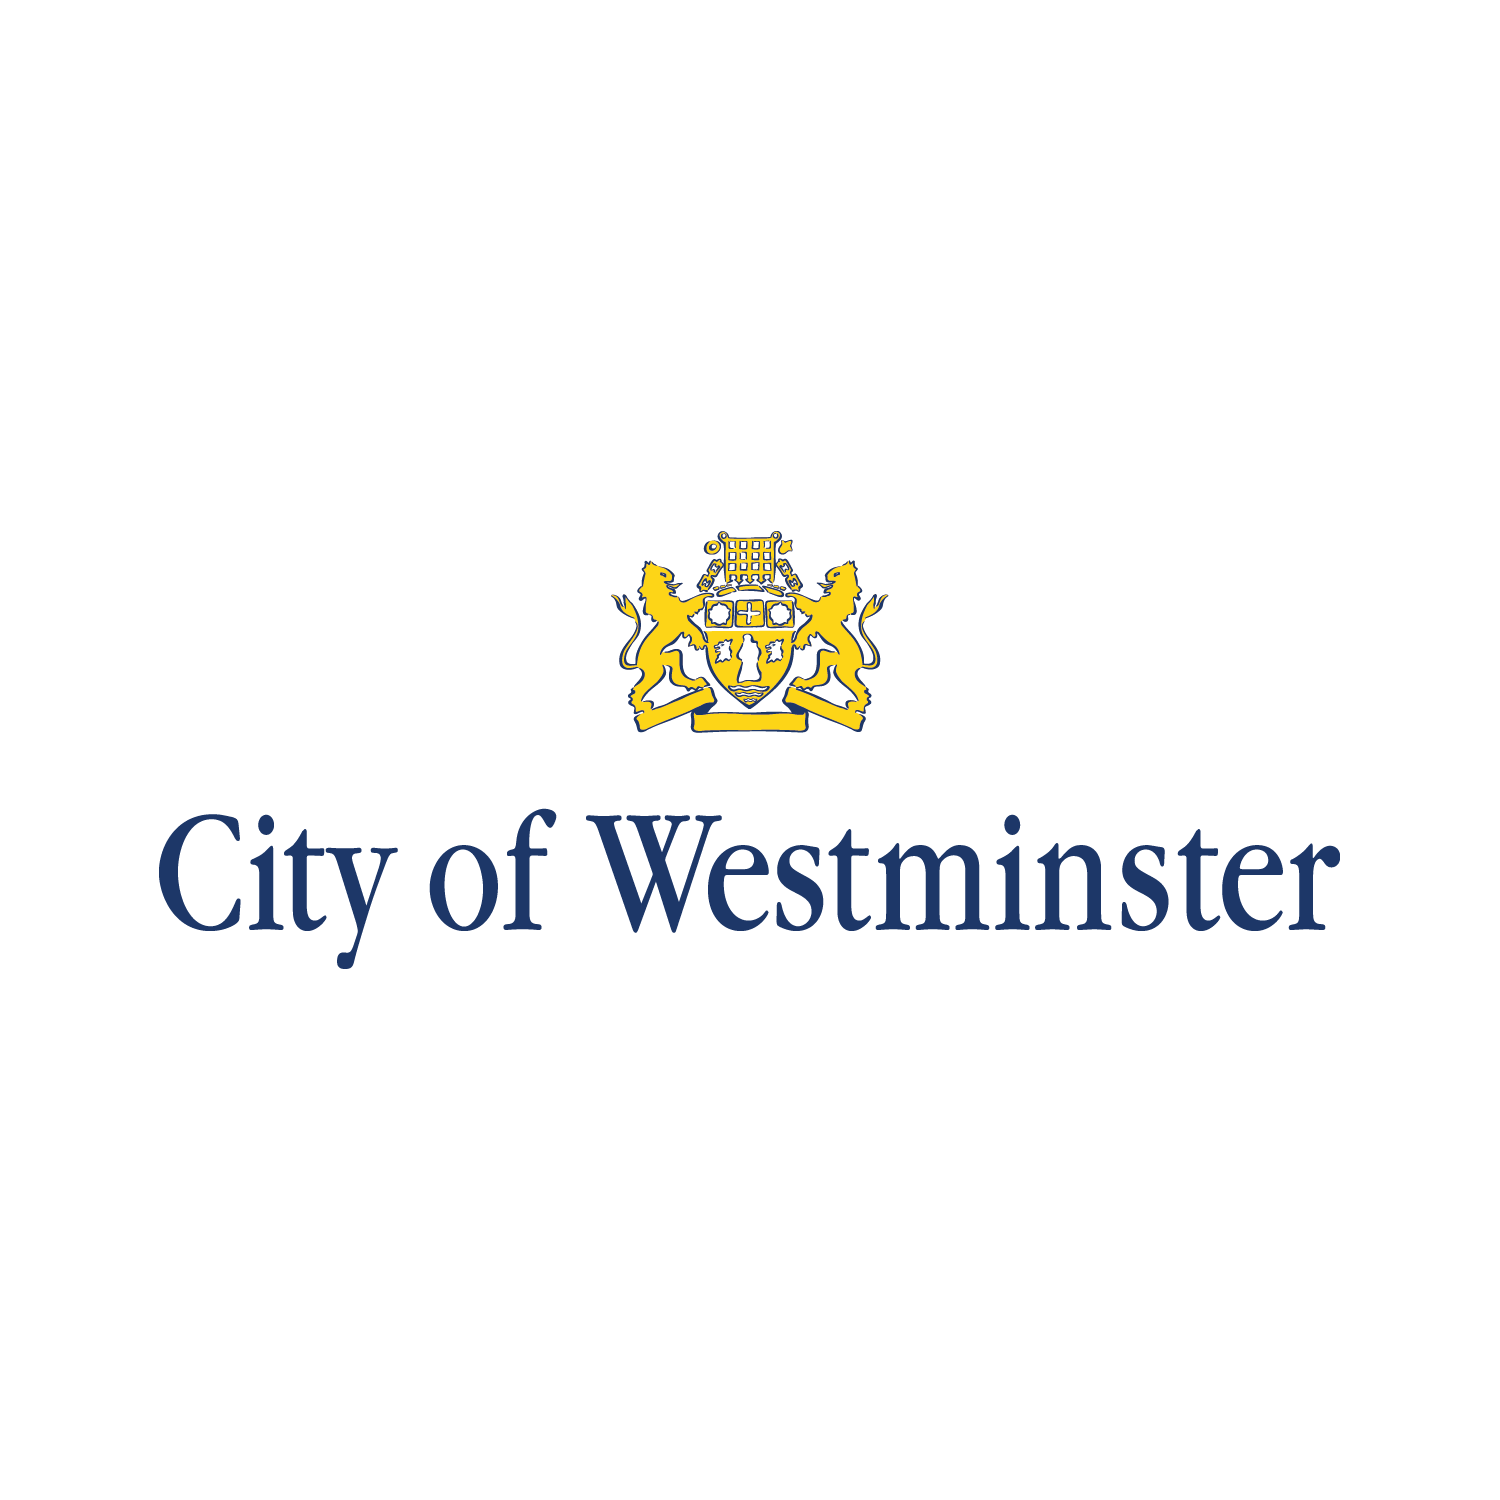 Westminster Logo - City of Westminster - Fonts In Use